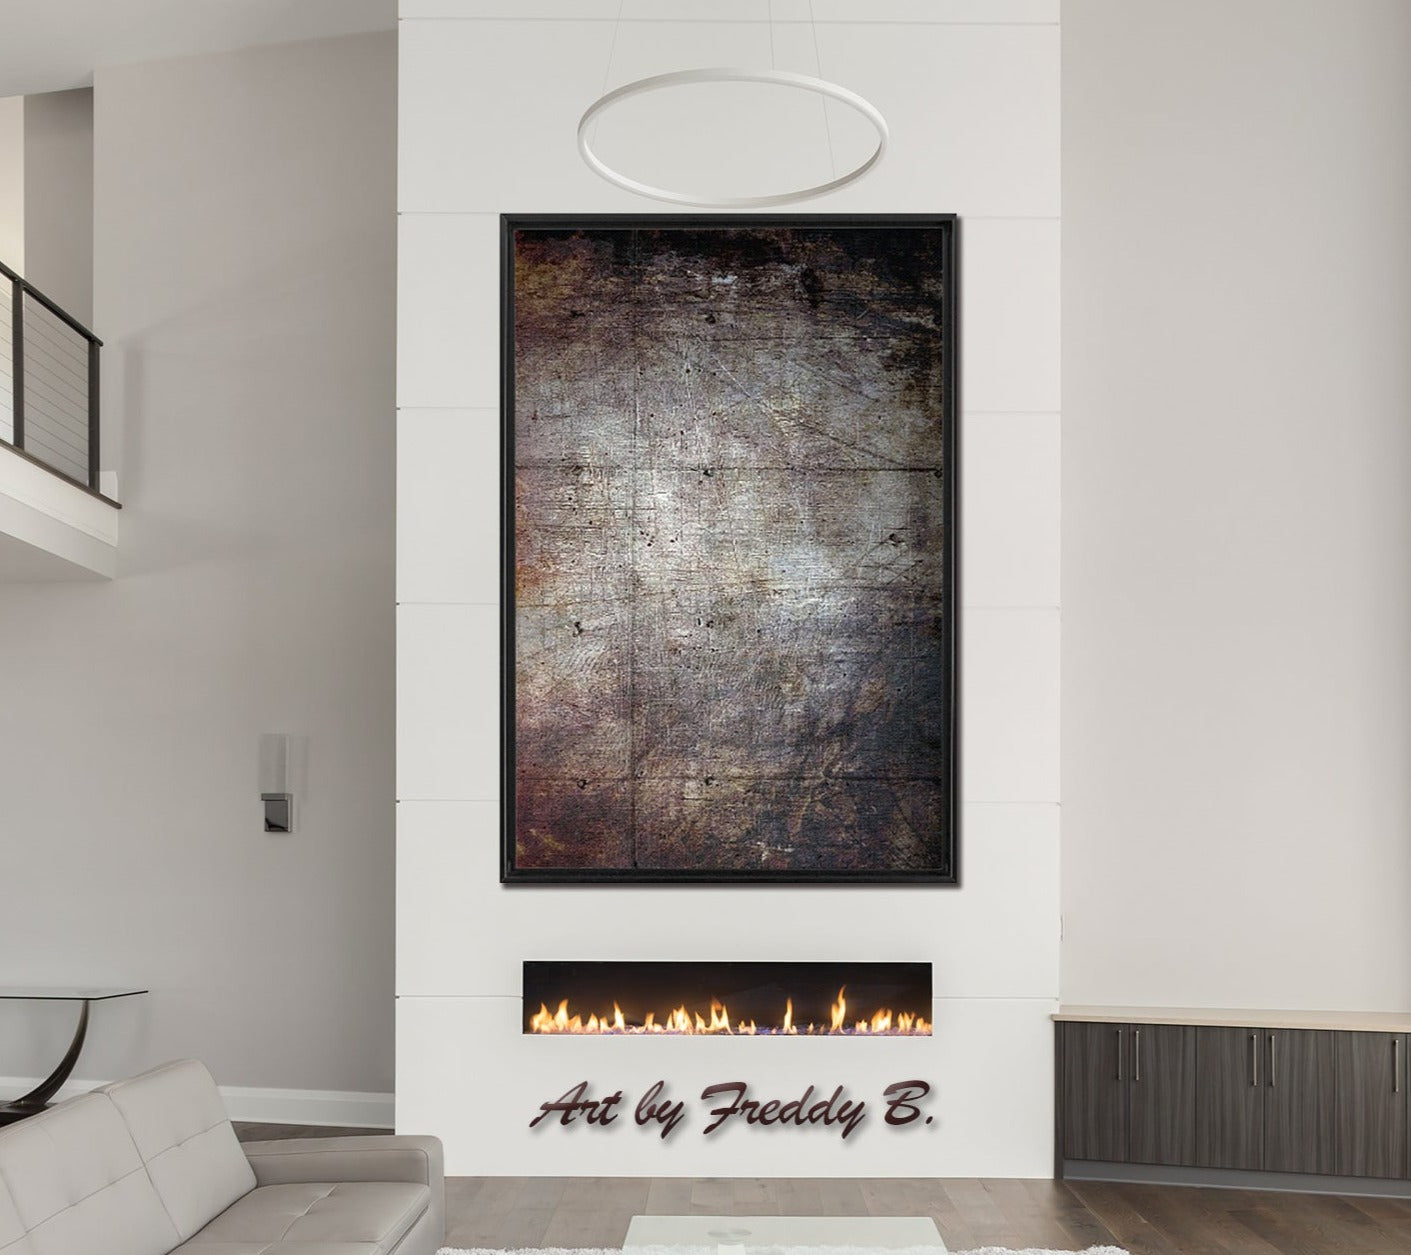 Modern Art Distressed Concrete Slab Print on Canvas in a Floating Frame hung above fireplace